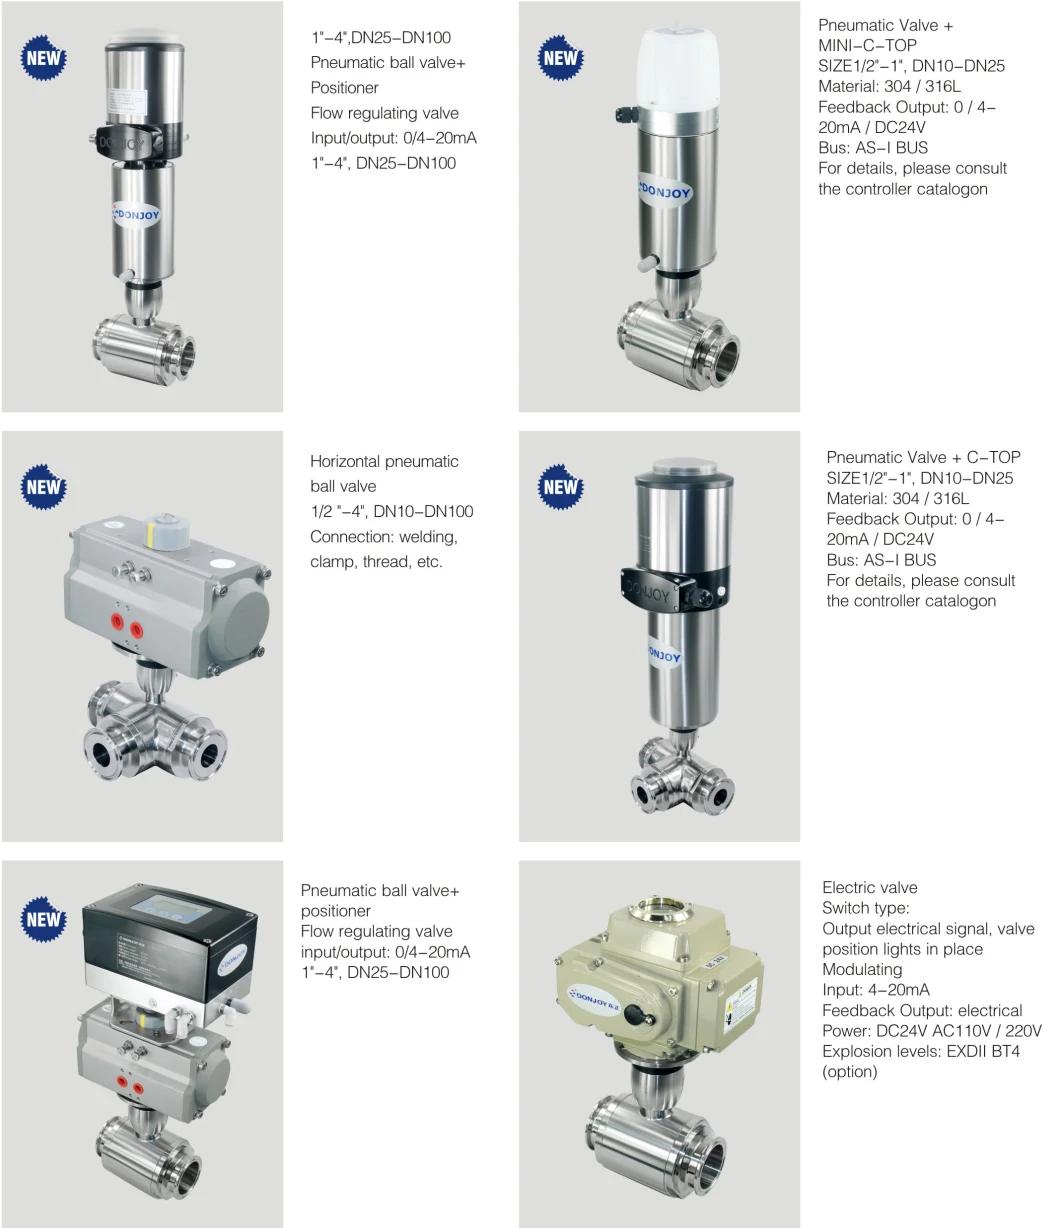 Us 3A Hygienic 3-Way Ball Valve with Intelligent Positioner